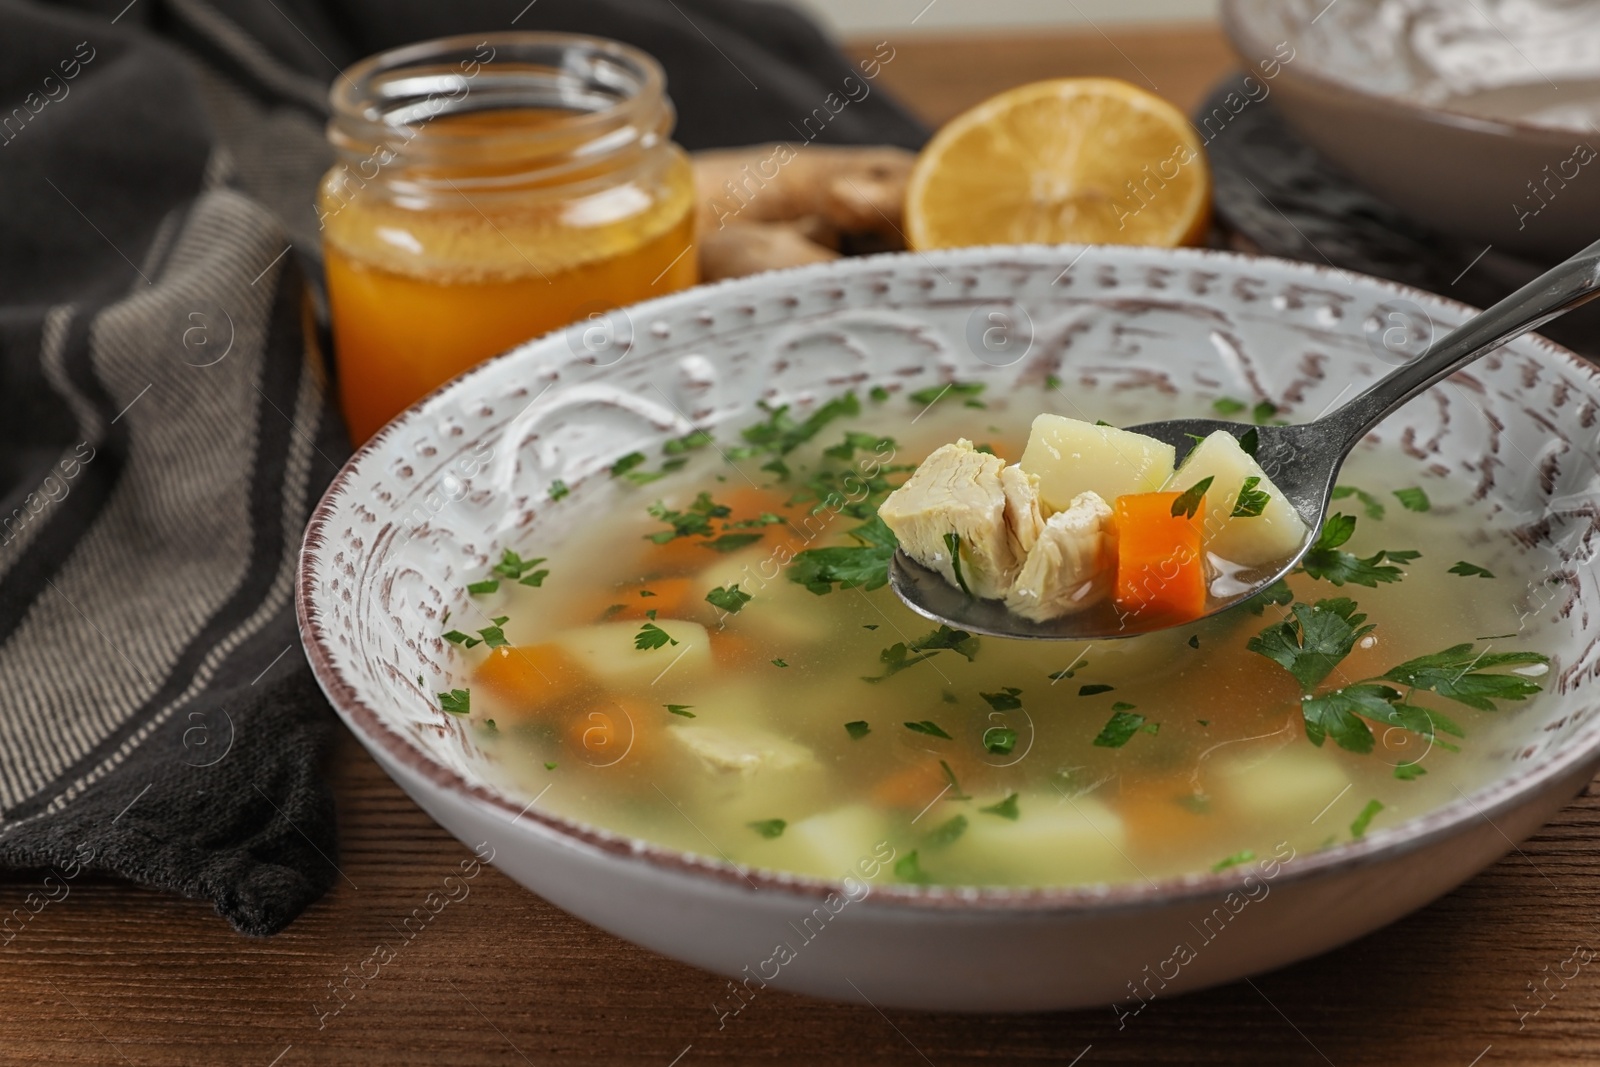 Photo of Spoon with fresh homemade soup to cure flu over bowl on wooden table